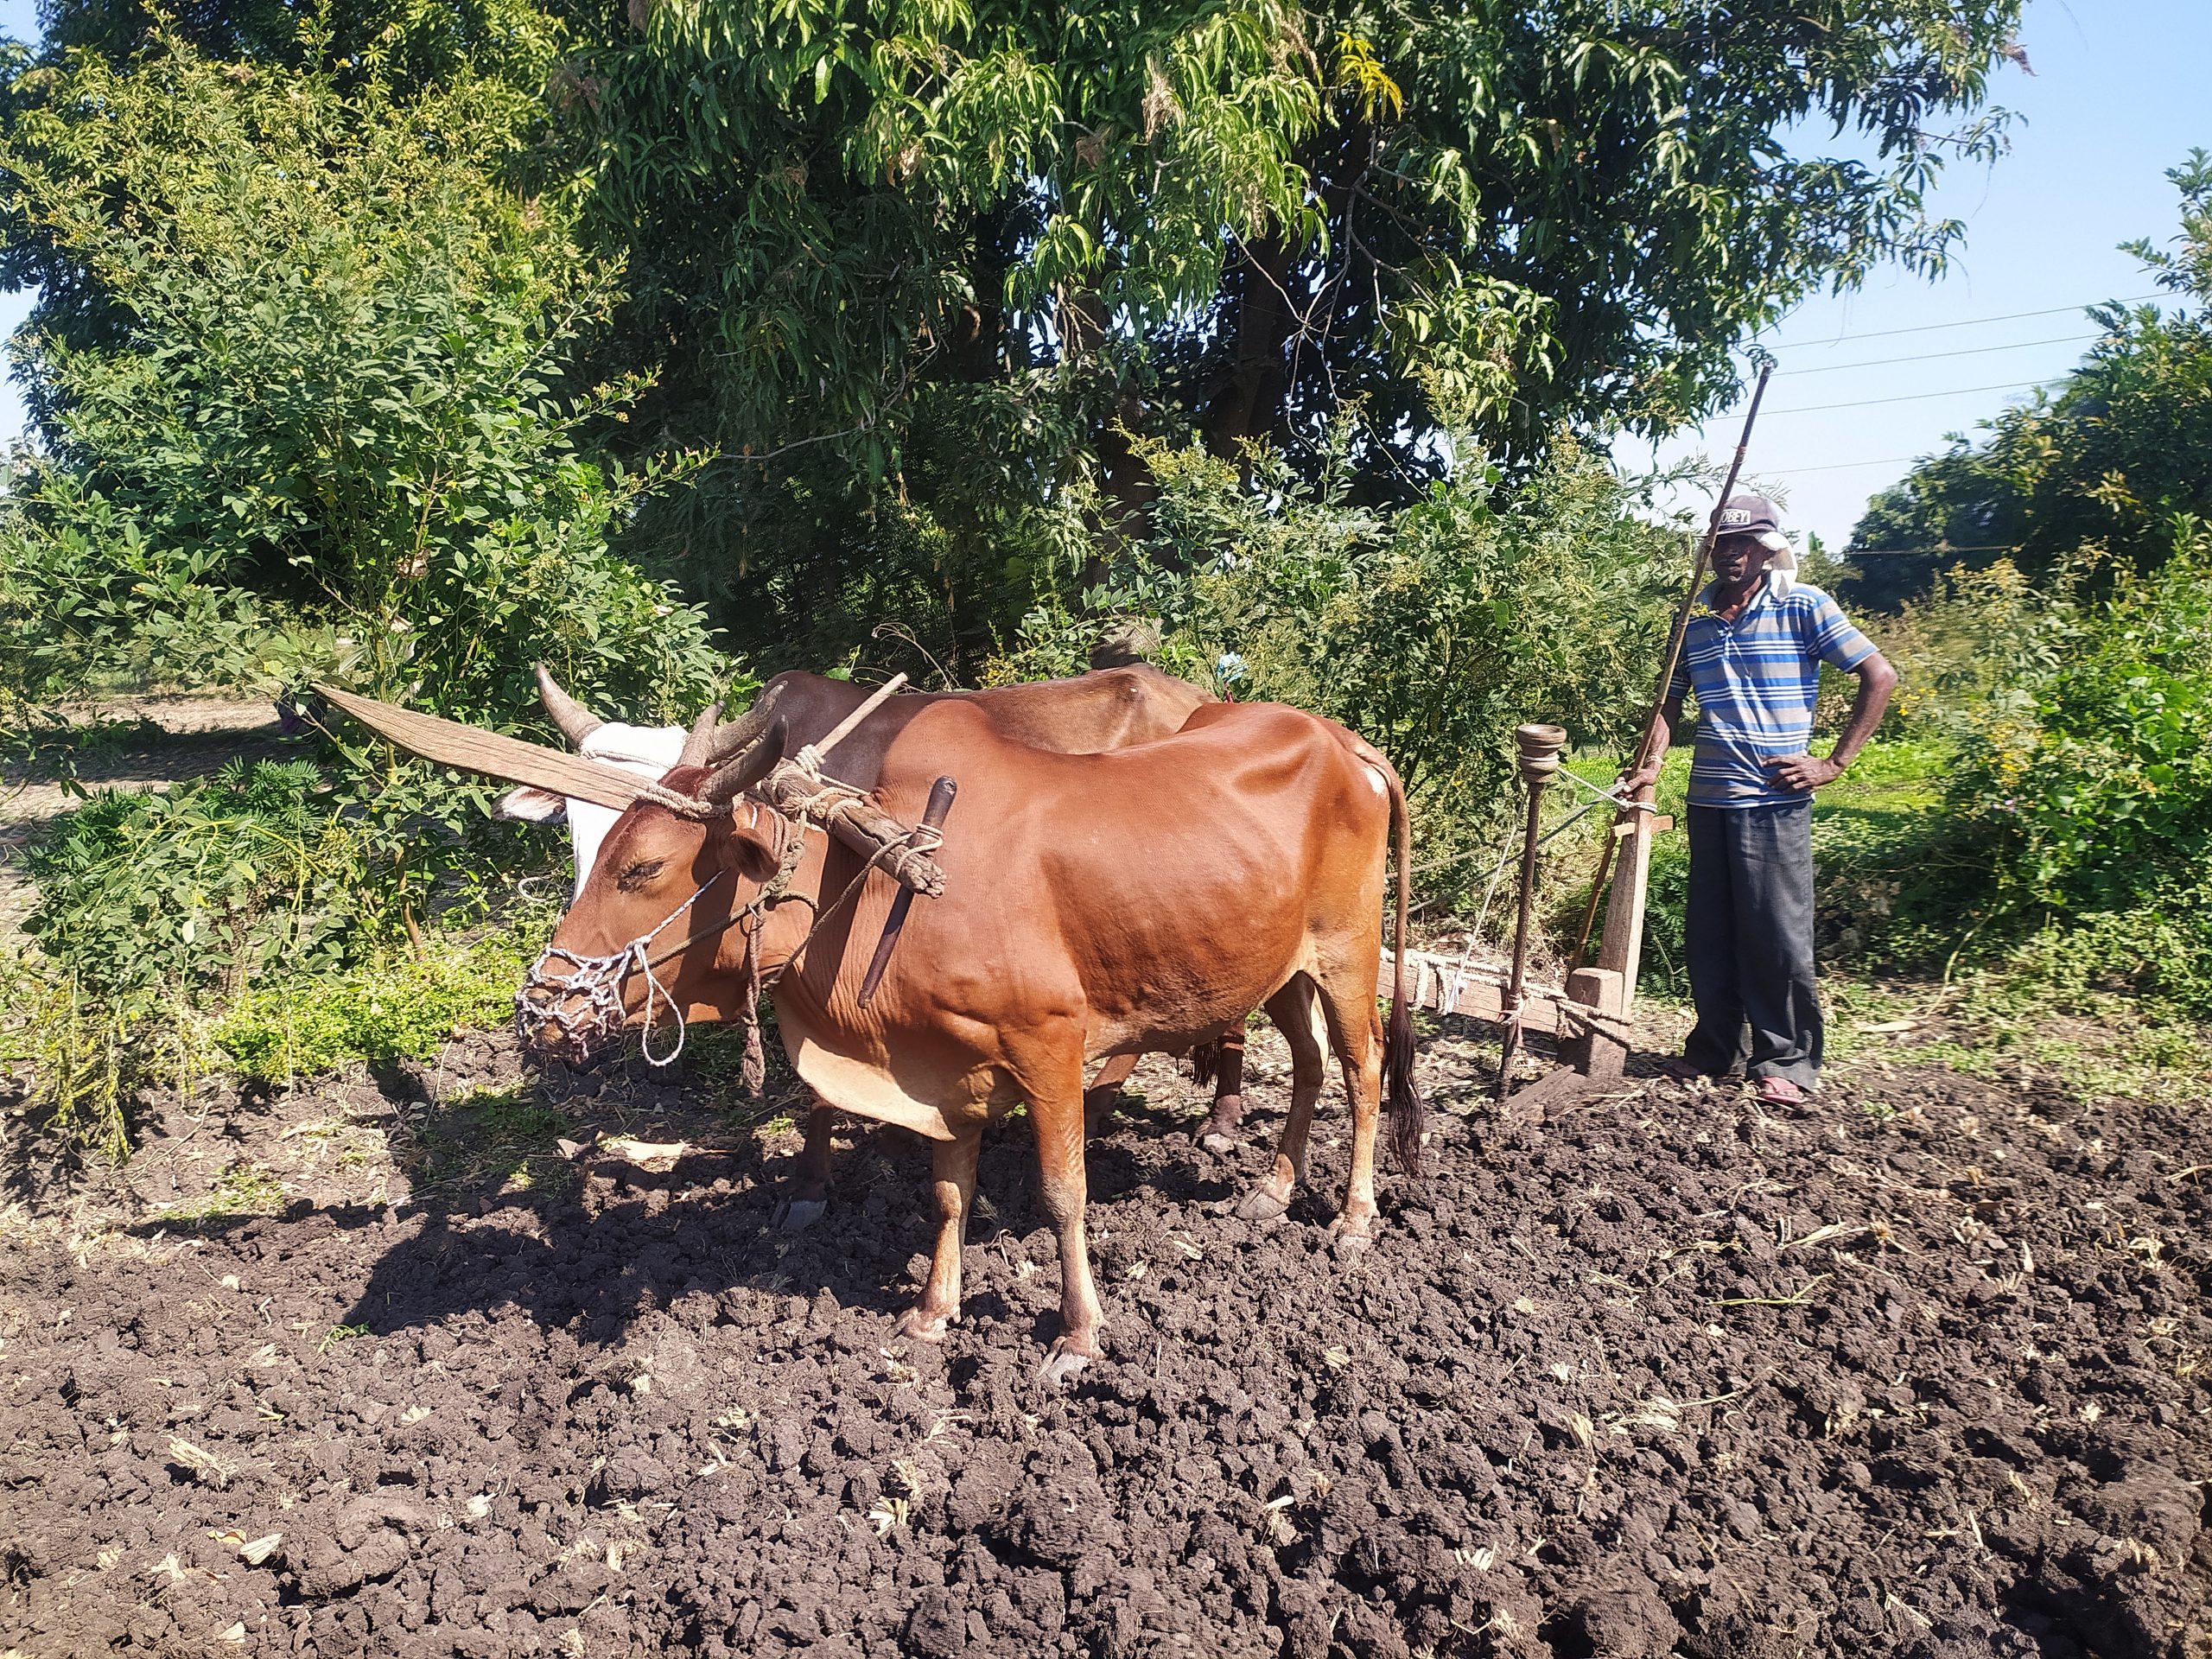 A farmer ploughing with oxen